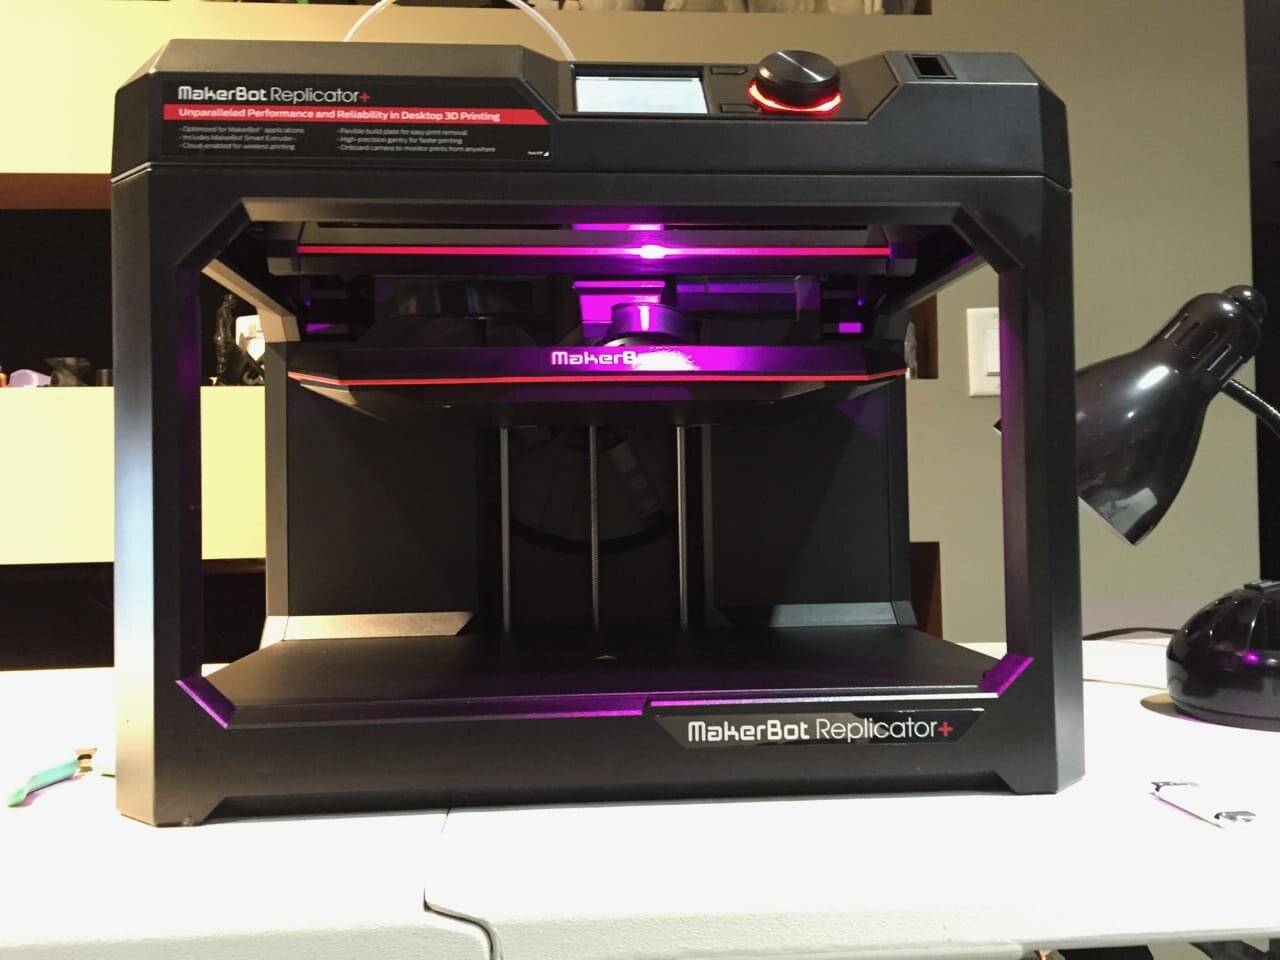  A possible educational 3D printer [Source: Fabbaloo] 